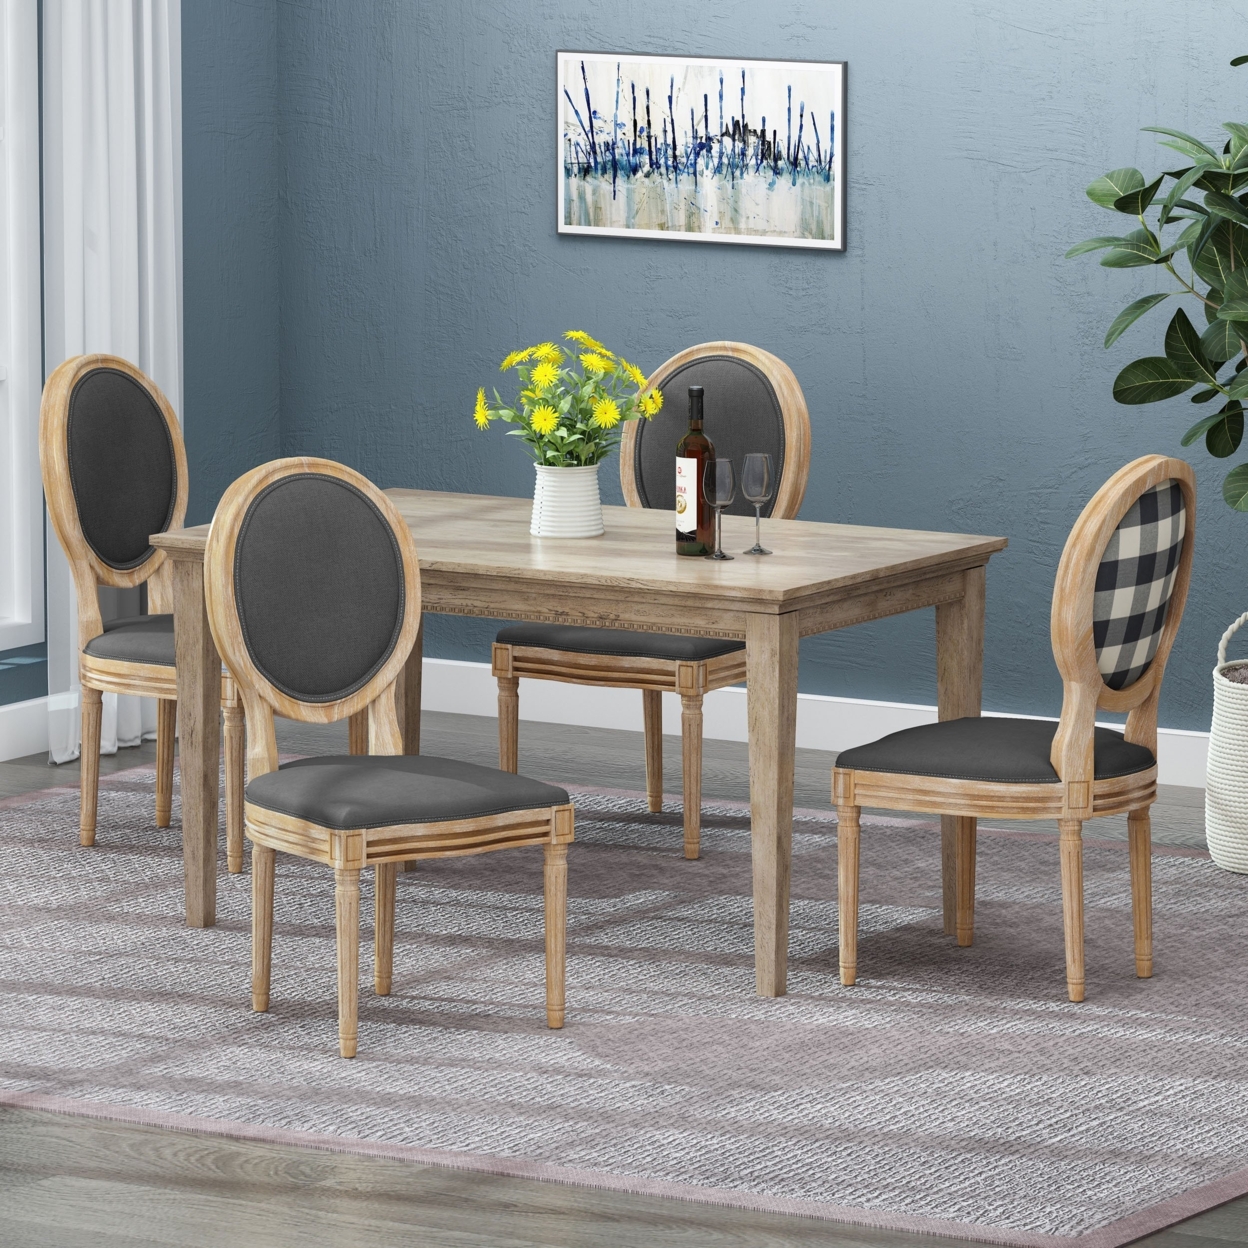 Lariya French Country Dining Chairs (Set Of 4) - Beige/natural